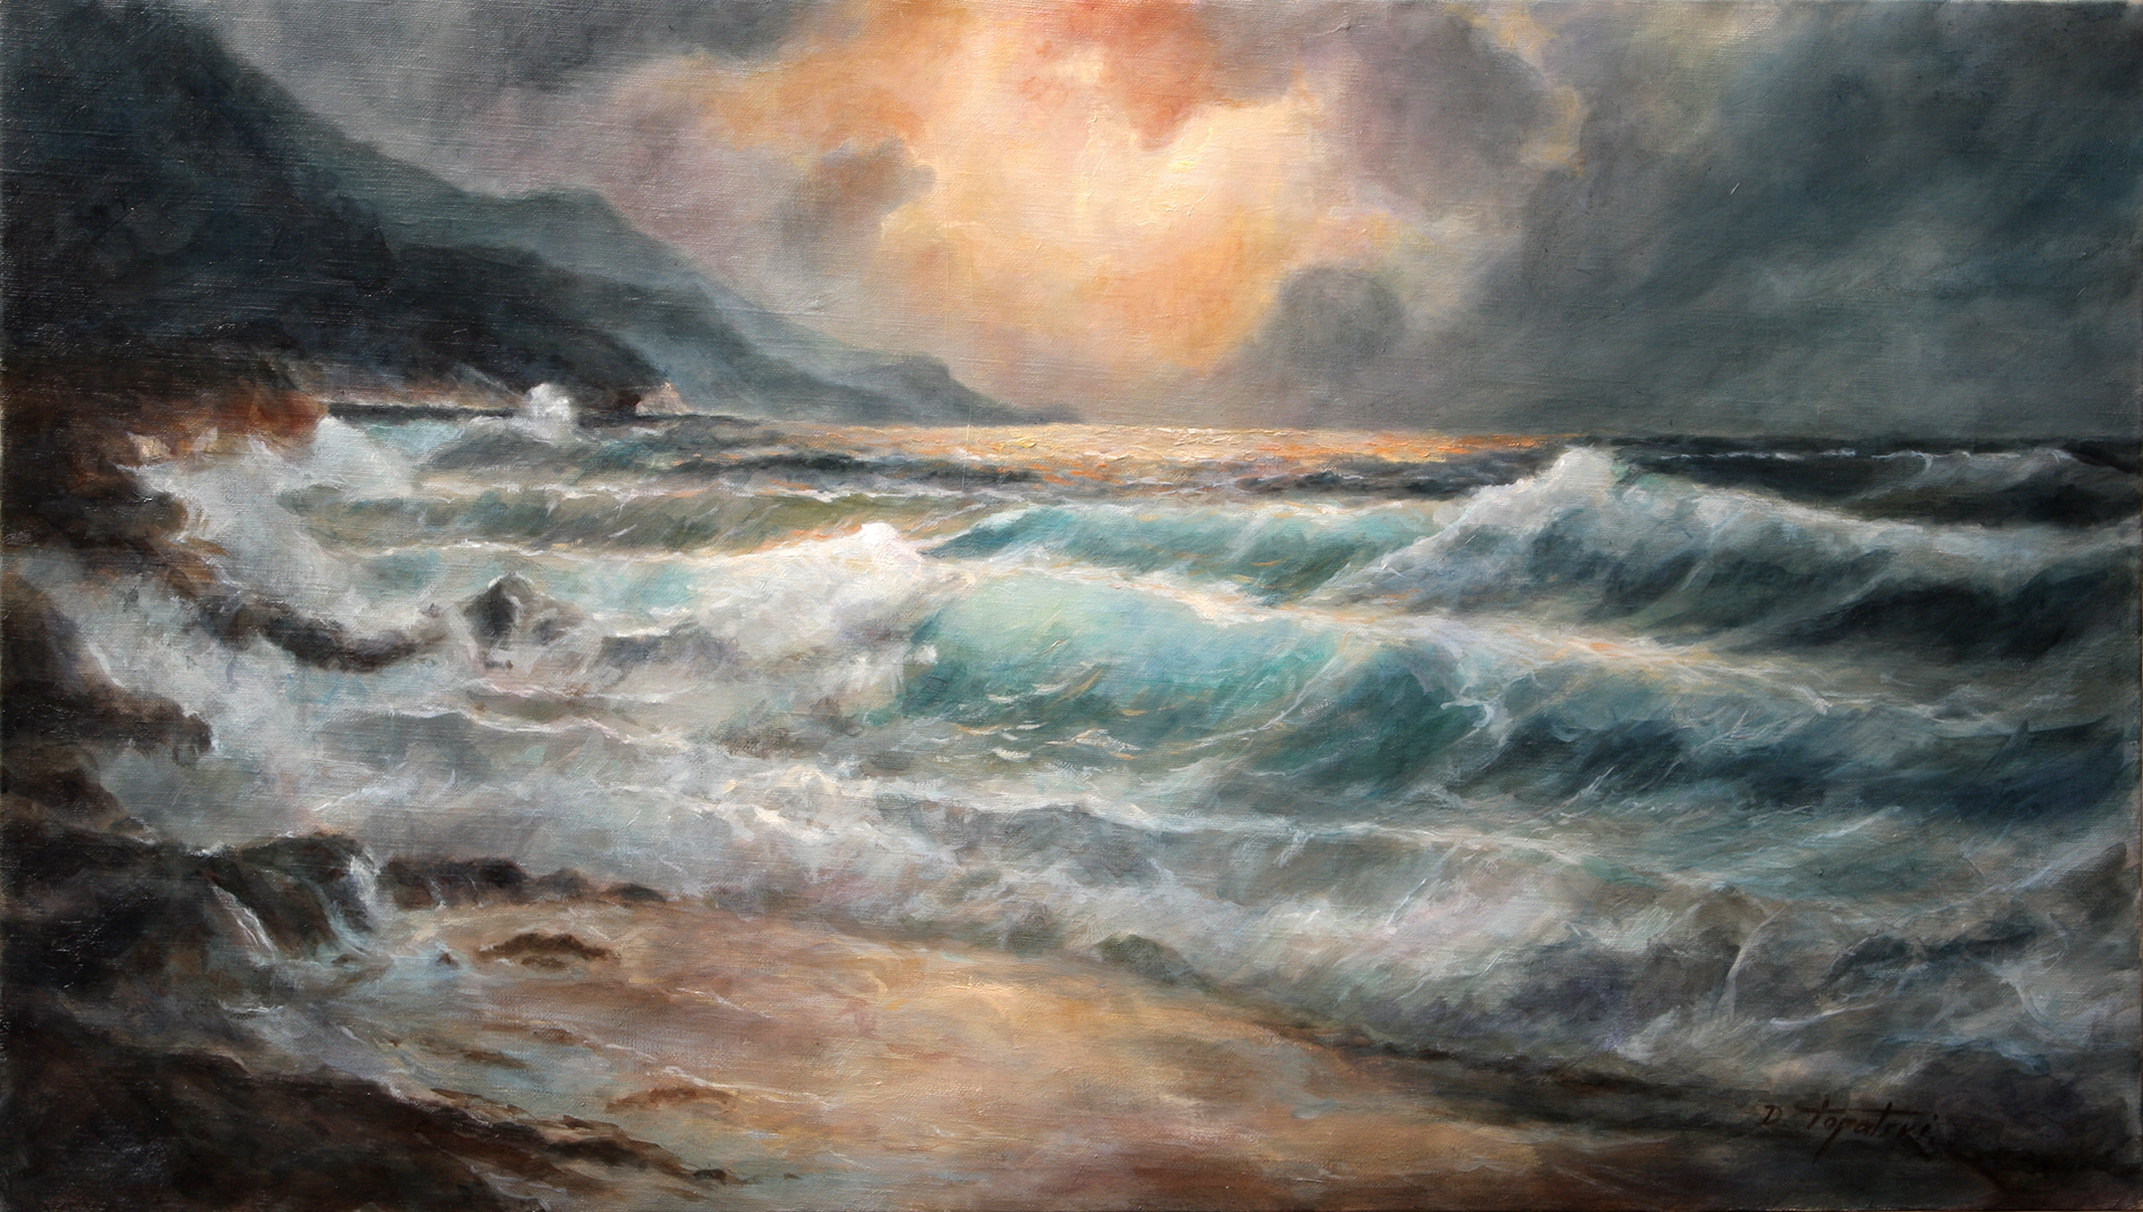 Sea and Waves – Seascape Oil Painting | Fine Arts Gallery - Original ...